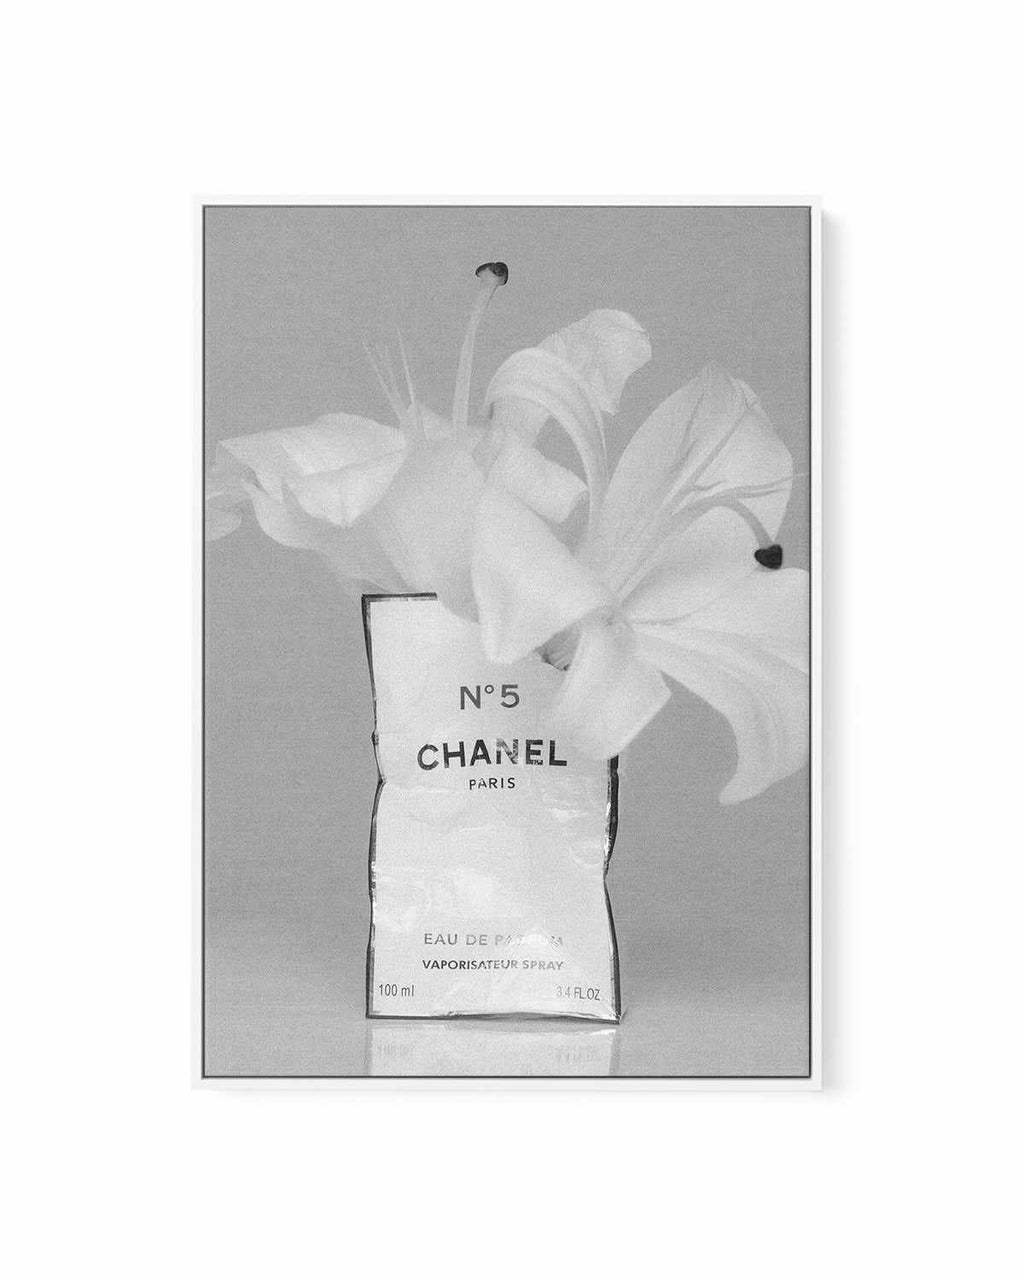 Buy 'Pink Flowers Chanel' by Mario Stefanelli Art Print